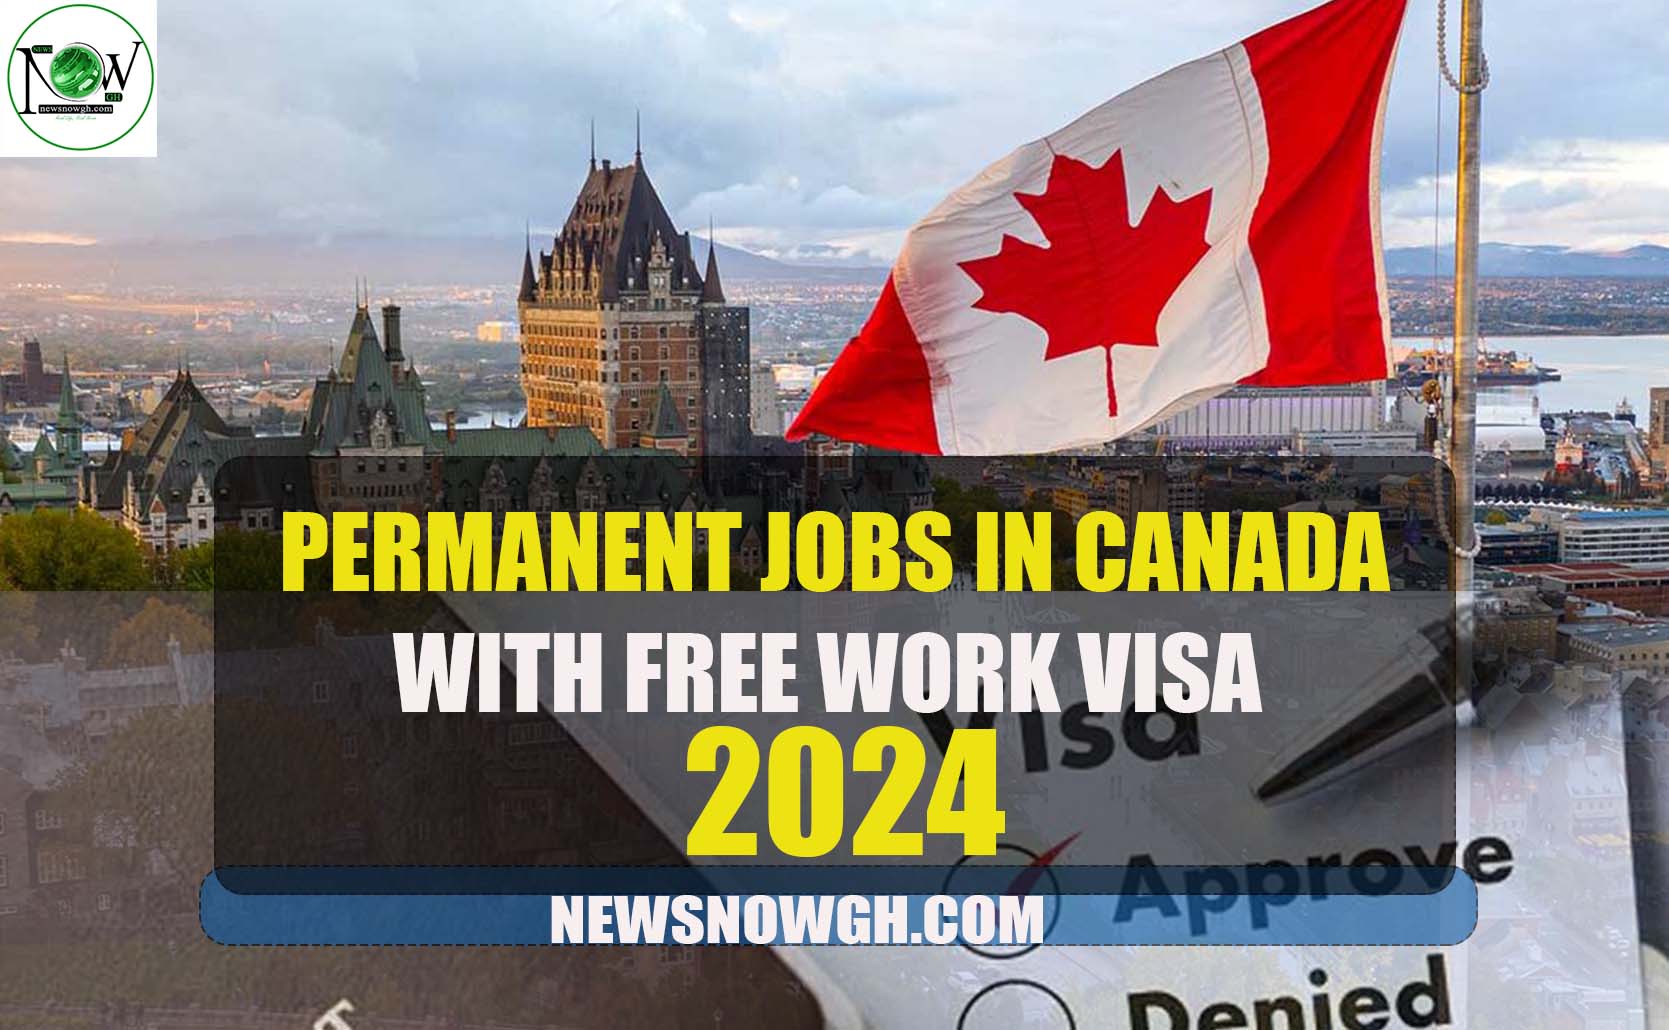 Permanent Jobs in Canada with Free Work Visa 2024